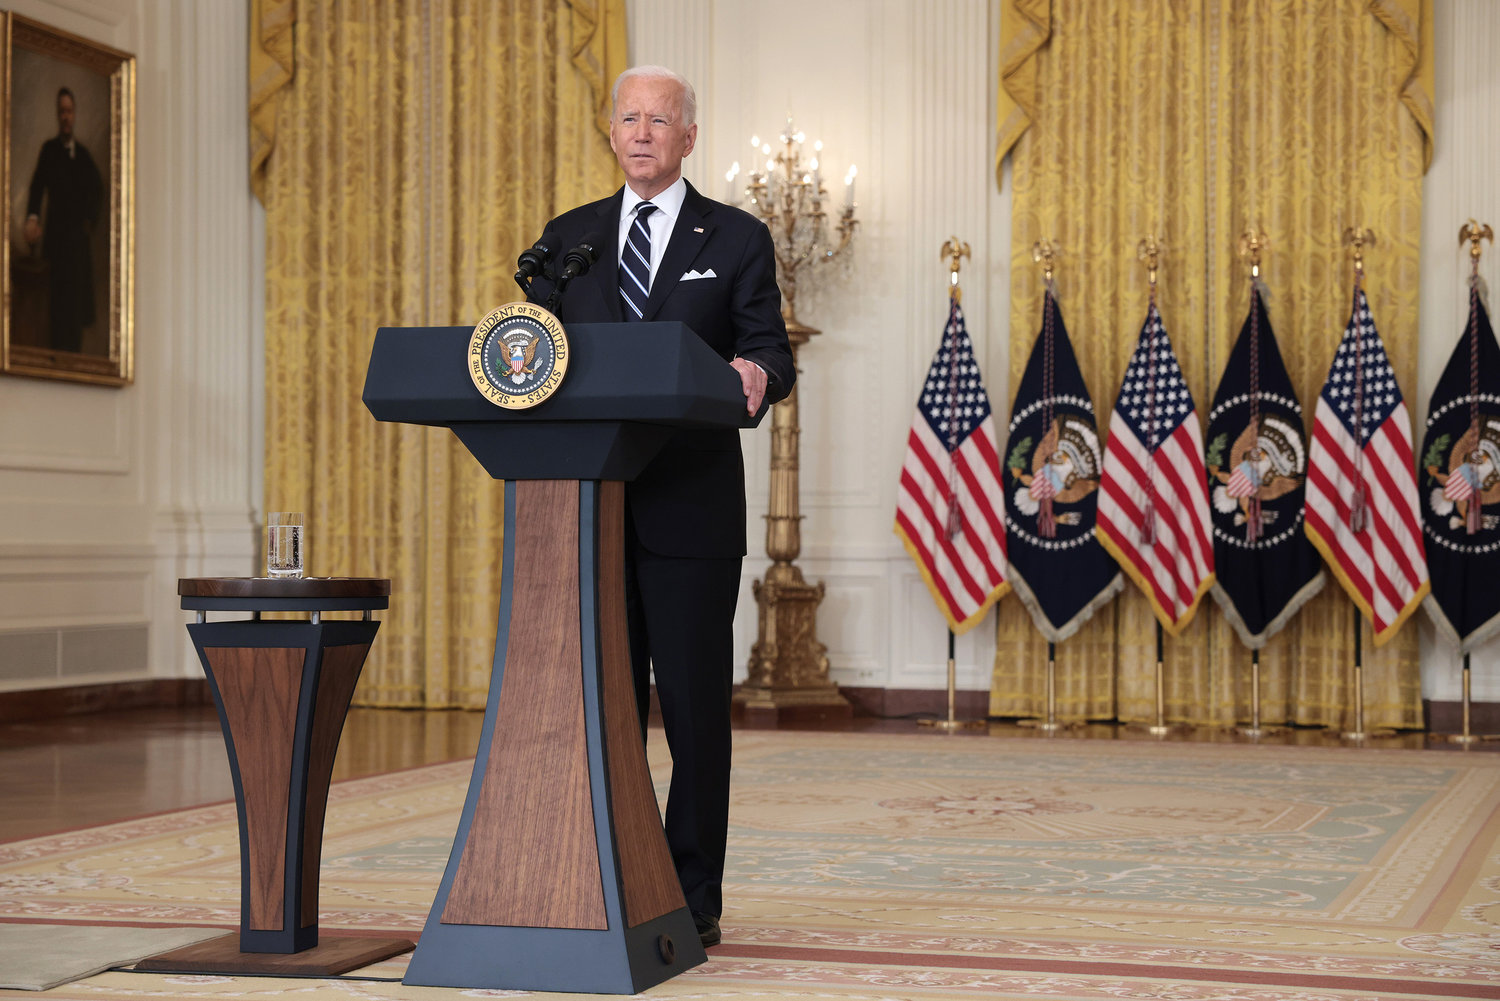 U.S. President Joe Biden delivers remarks on the COVID-19 response and the vaccination program in the East Room of the White House on Wednesday, August 18, 2021 in Washington, D.C. (Anna Moneymaker/Getty Images/TNS)